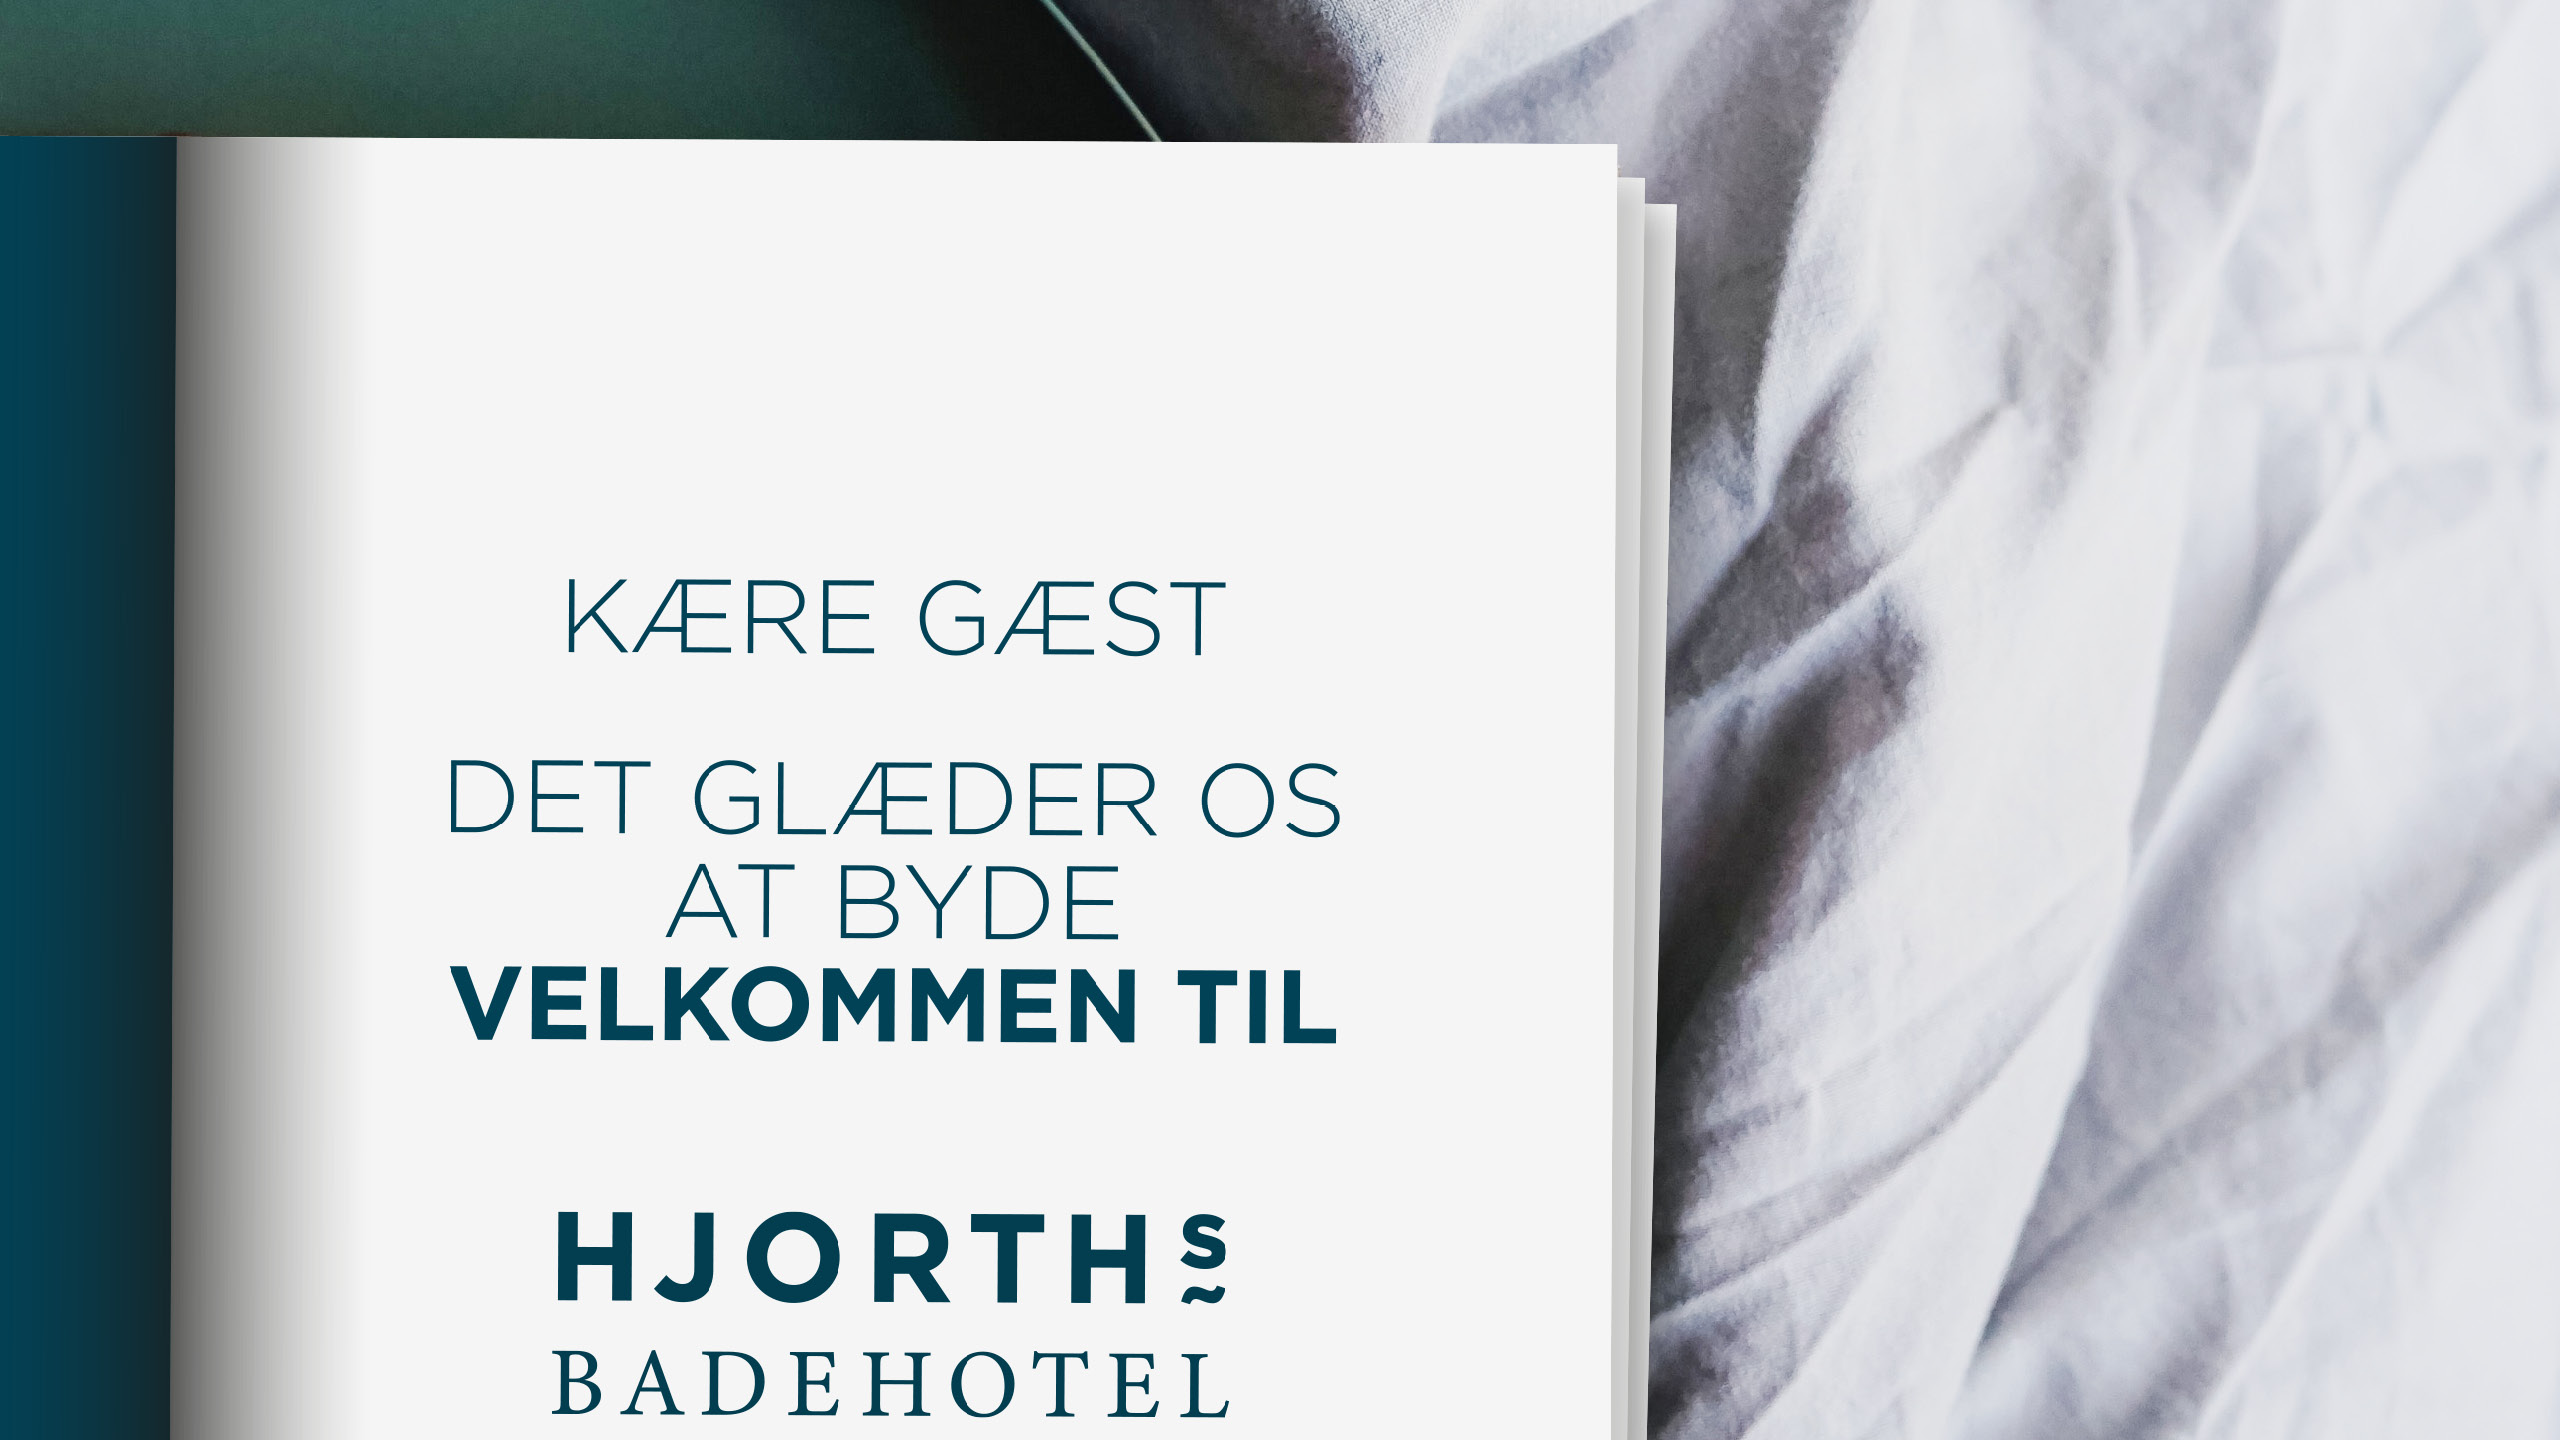 Guide for HJORTHs Badehotel